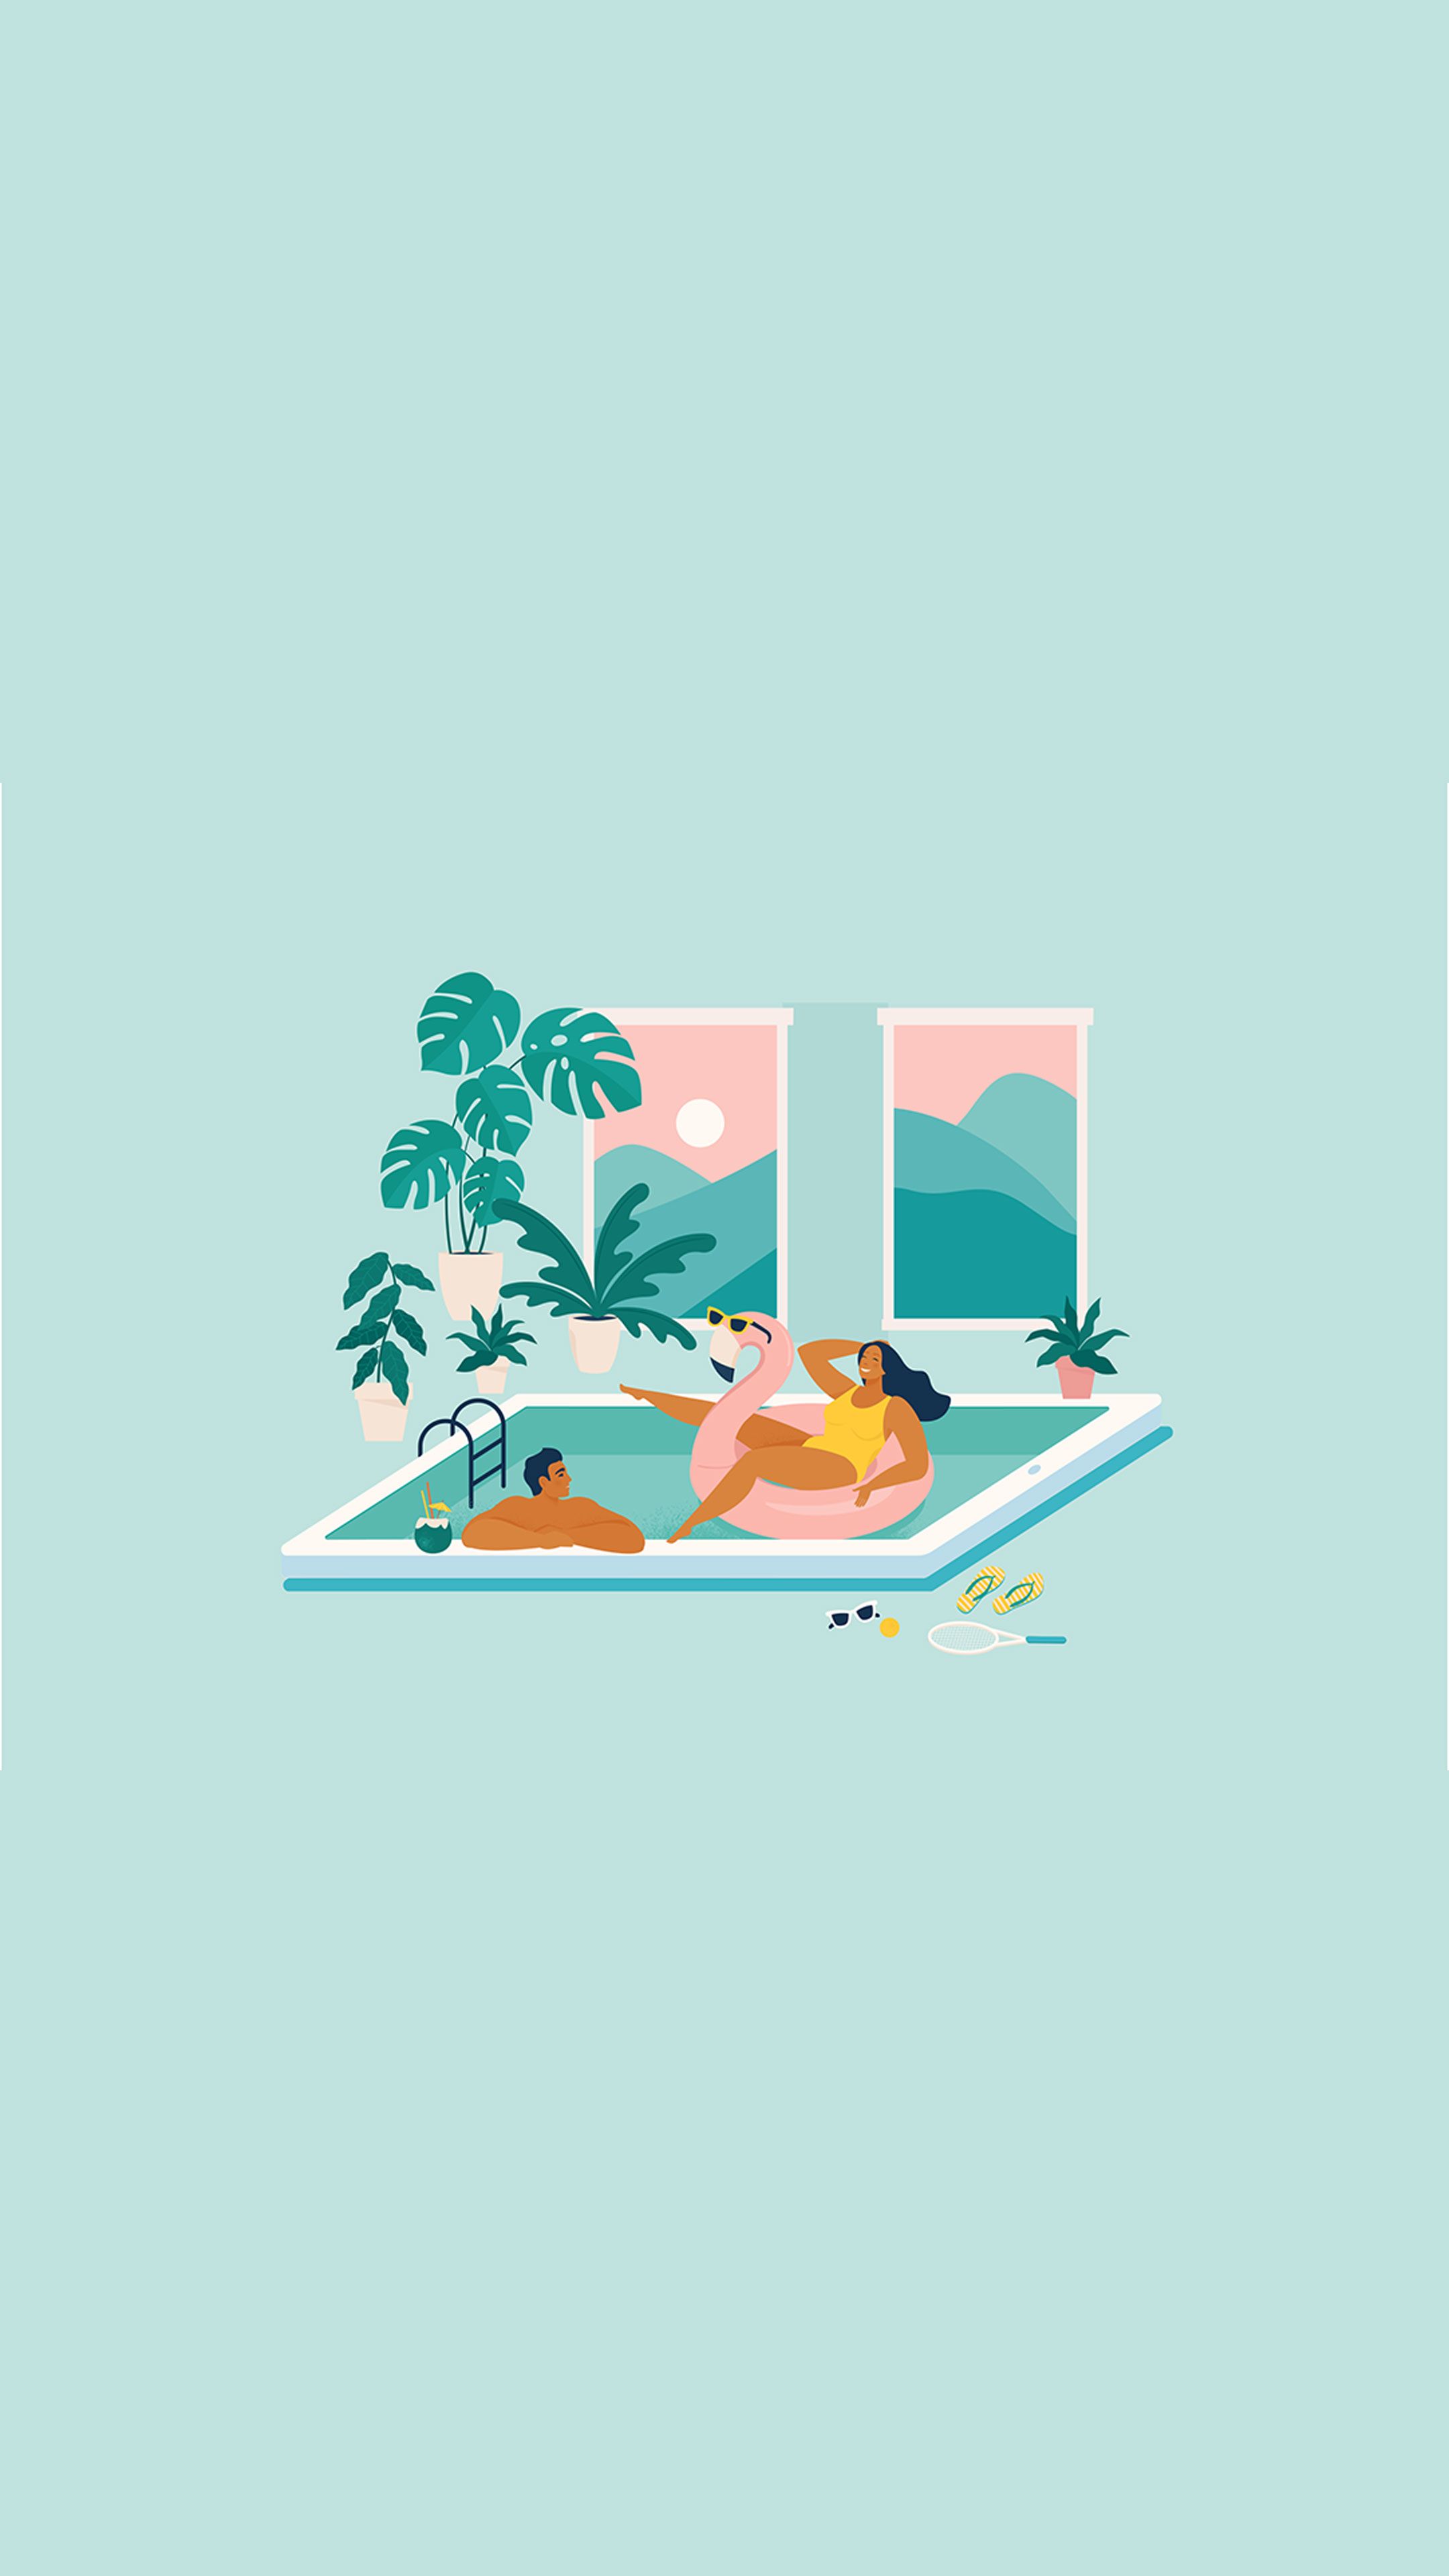 Illustration of two people relaxing in a pool